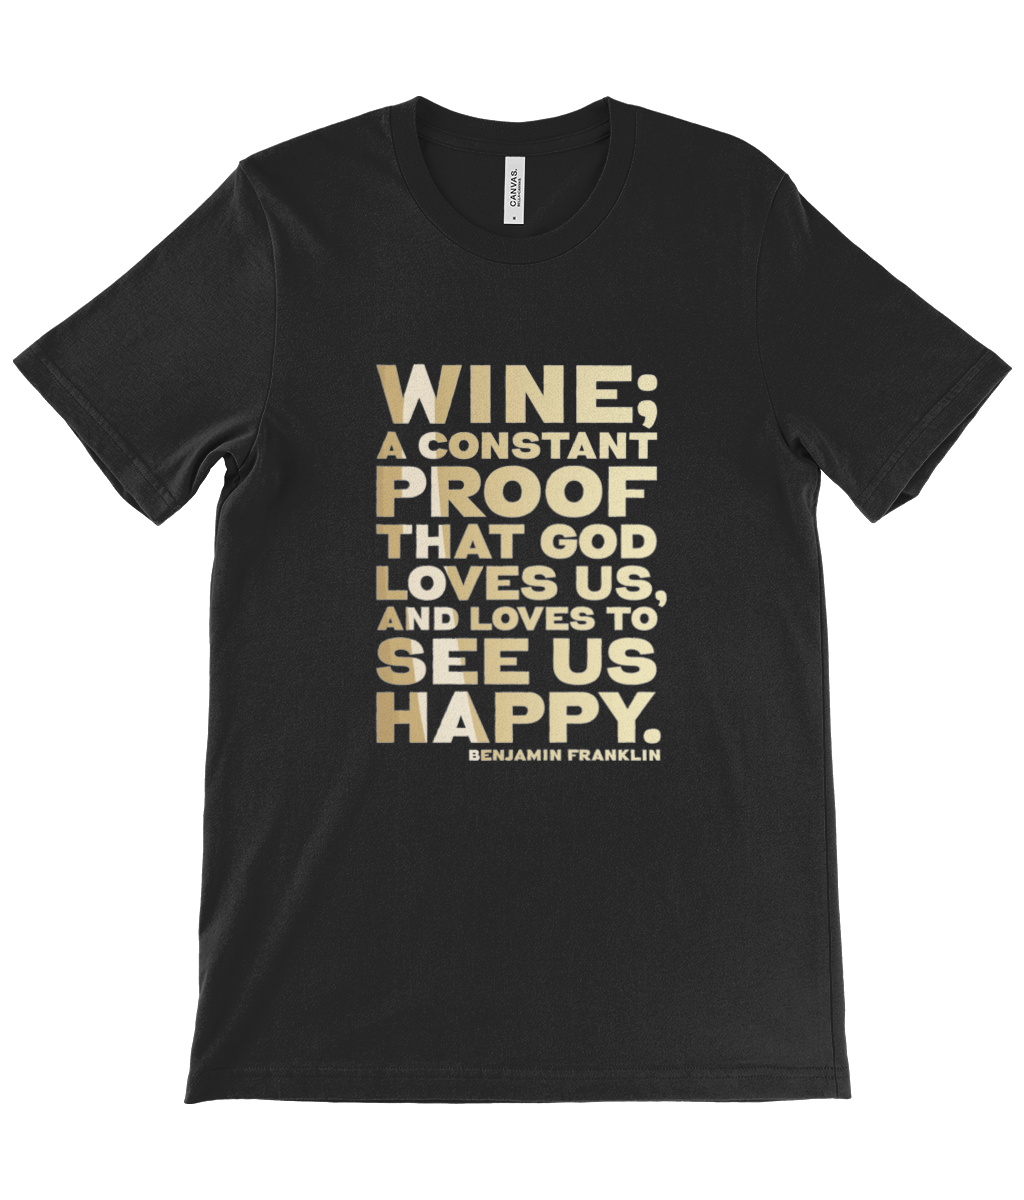 Canvas Unisex Crew Neck T-Shirt - Wine is constant proof that God loves us and likes to see us happy - Benjamin Franklin (WHITE)